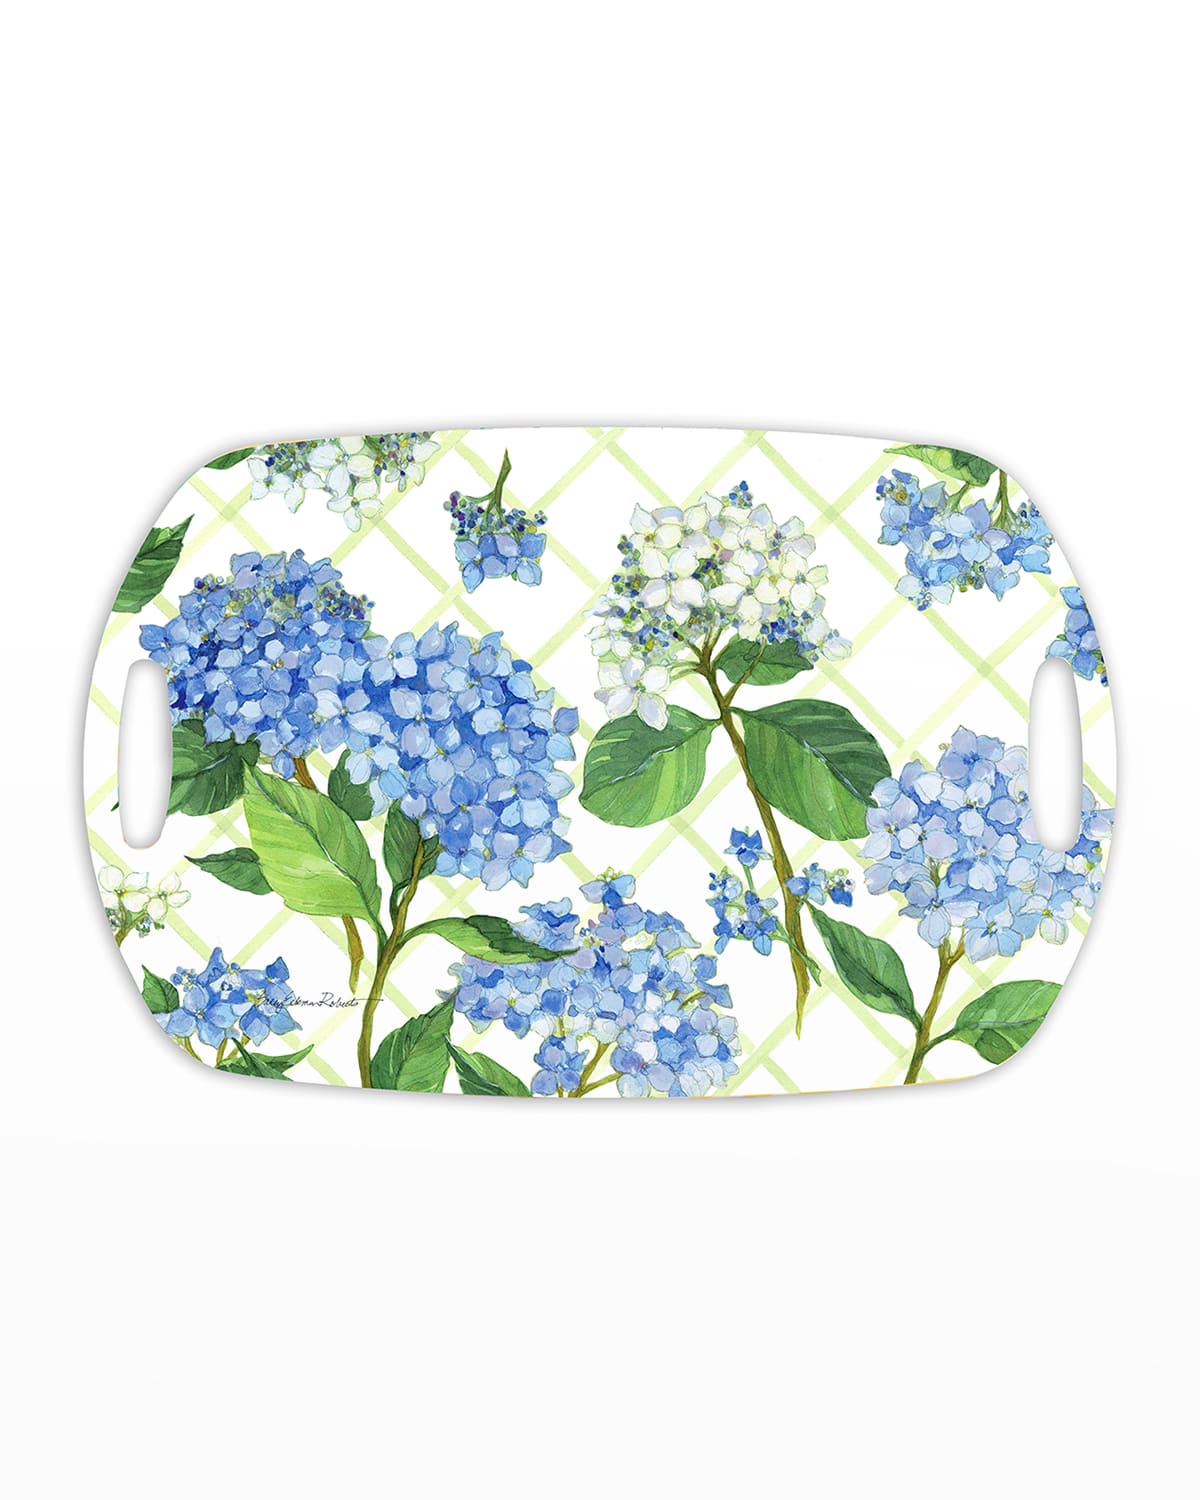 Shop Bamboo Table Hydrangea Lattice Shatter-resistant Bamboo Serving Tray In Blue